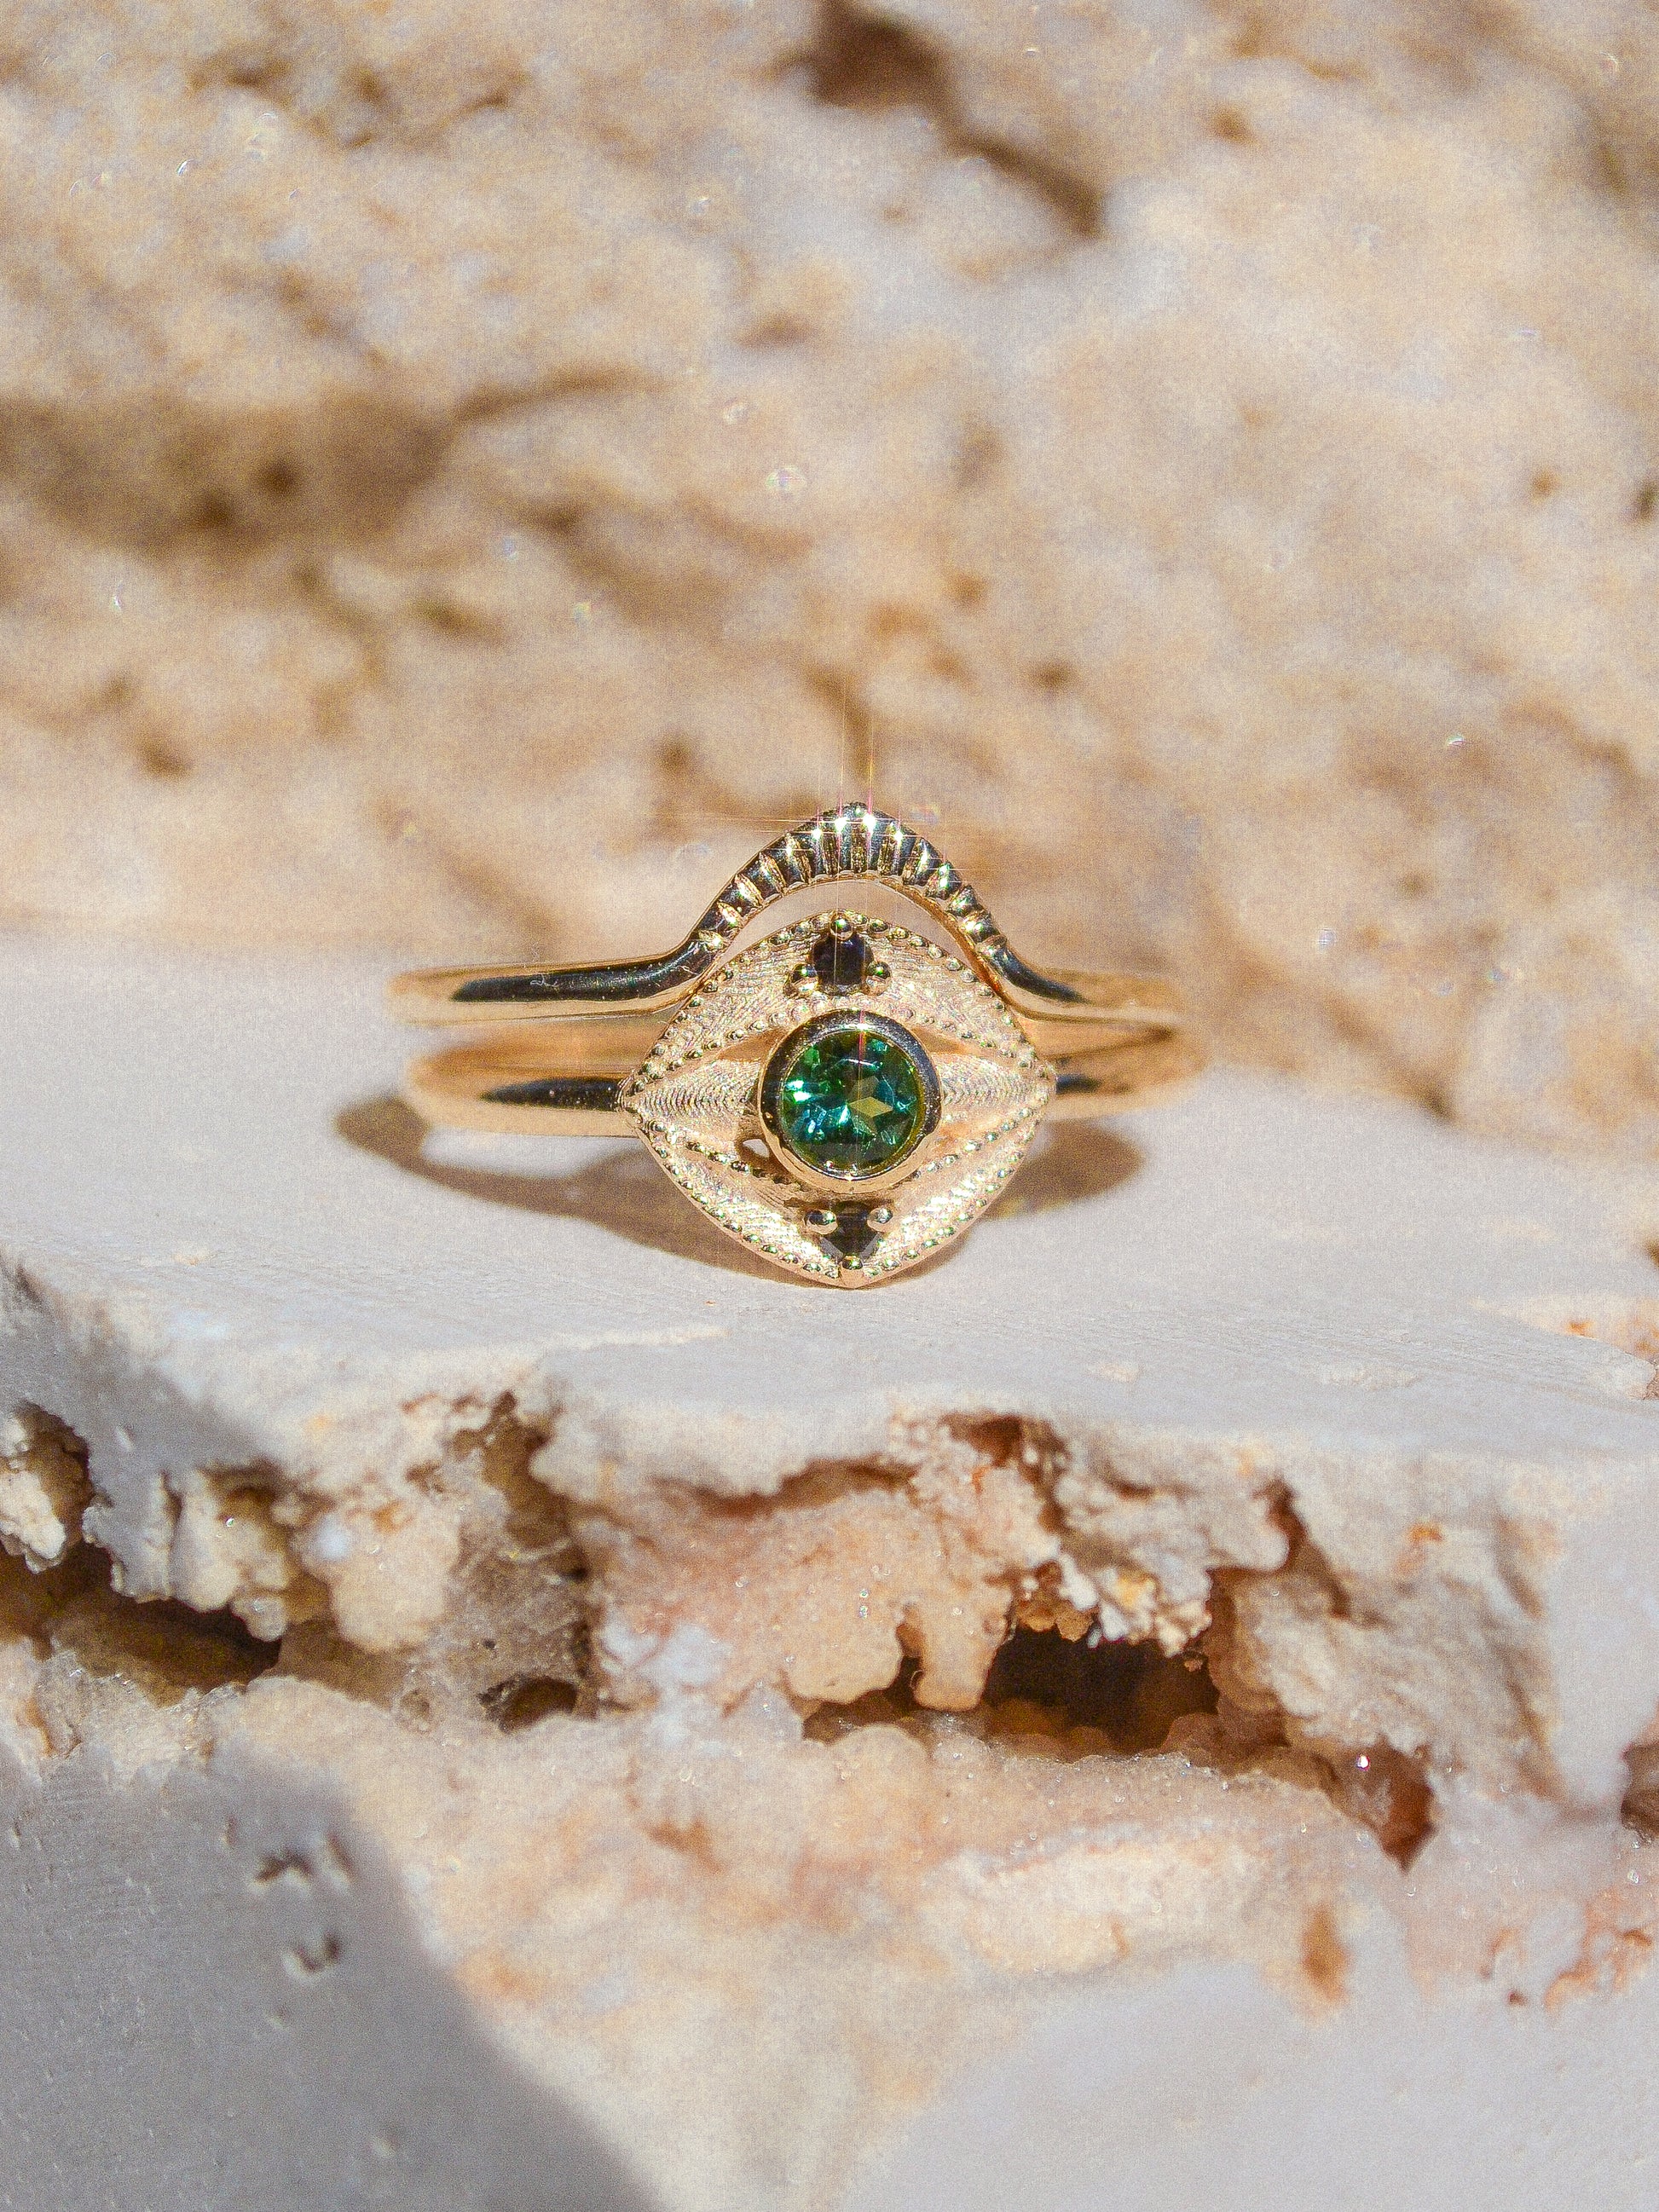 Blue green tourmaline encompassed in an eye shape of solid 14k yellow gold and 2 white diamonds. Inspired by an island in western Scotland. Each Miarante piece is carefully handcrafted in Chicago by a skilled production team.